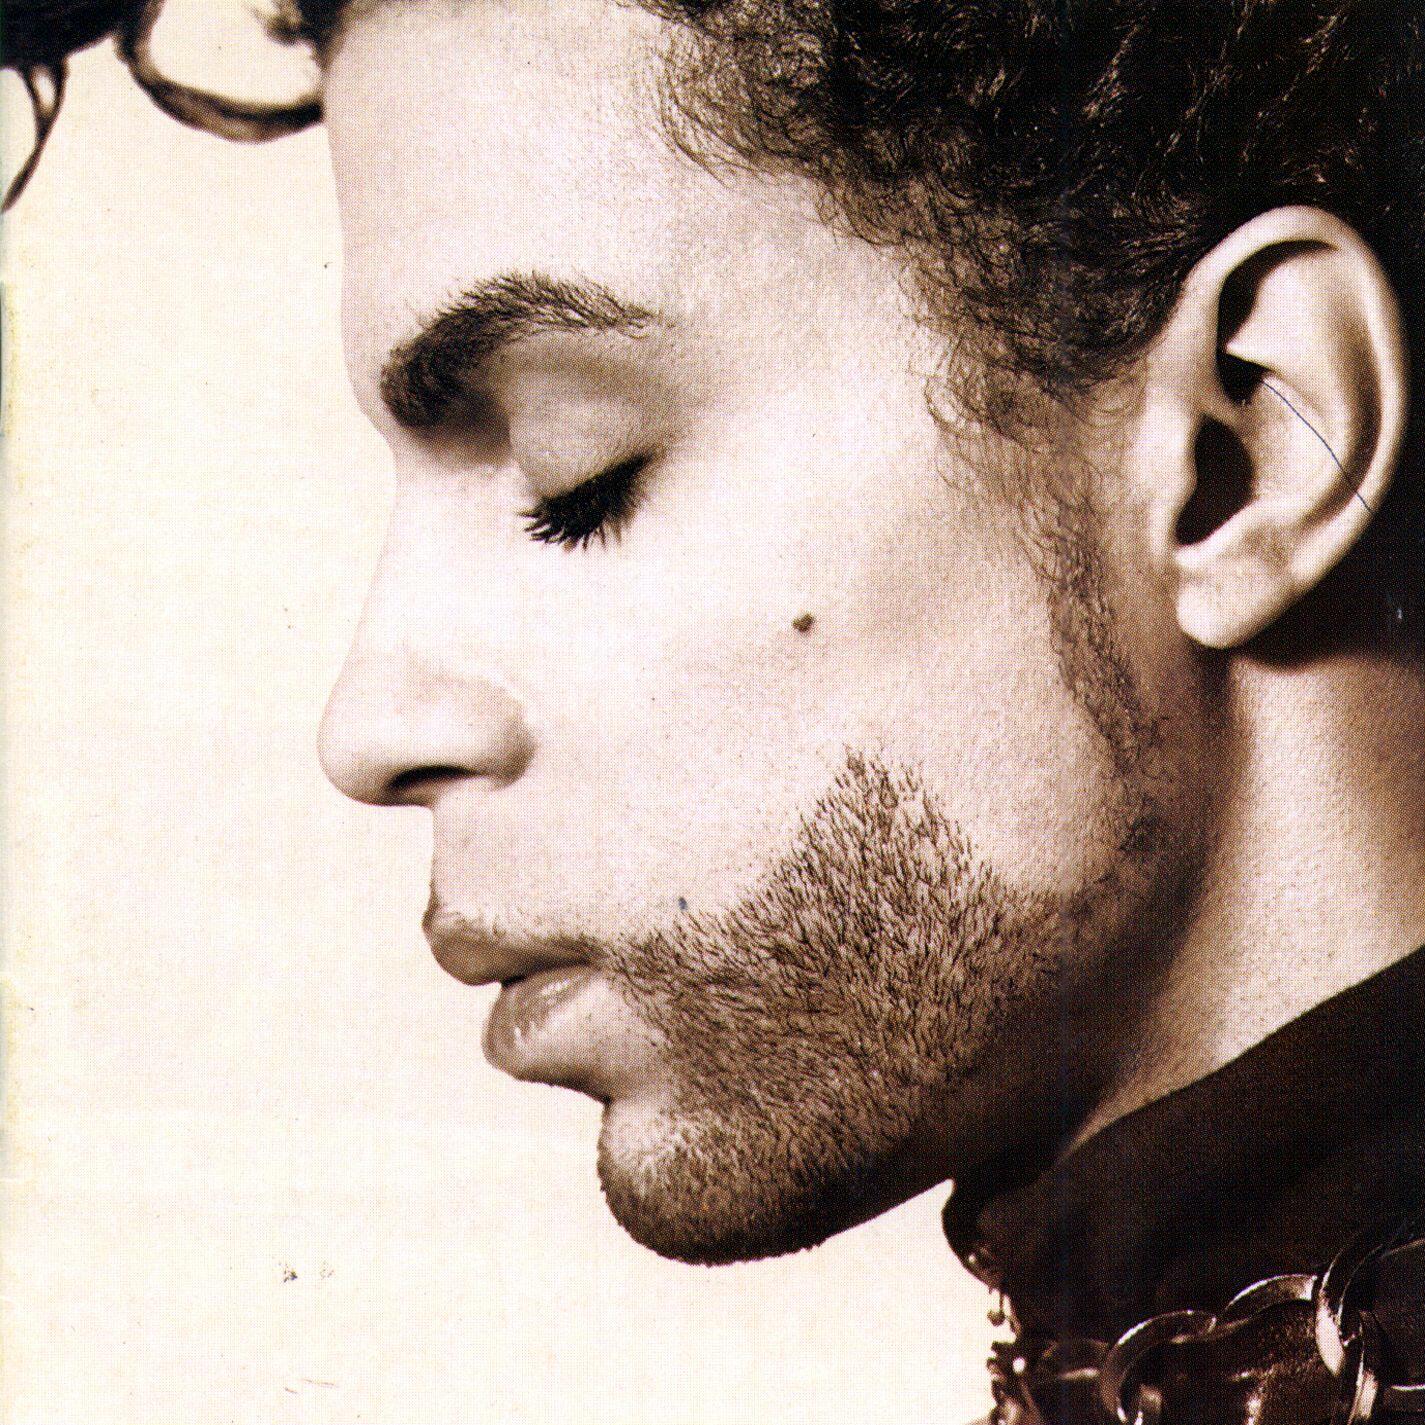 One Man 1001 Albums: Prince ‎The Hits / The B-Sides